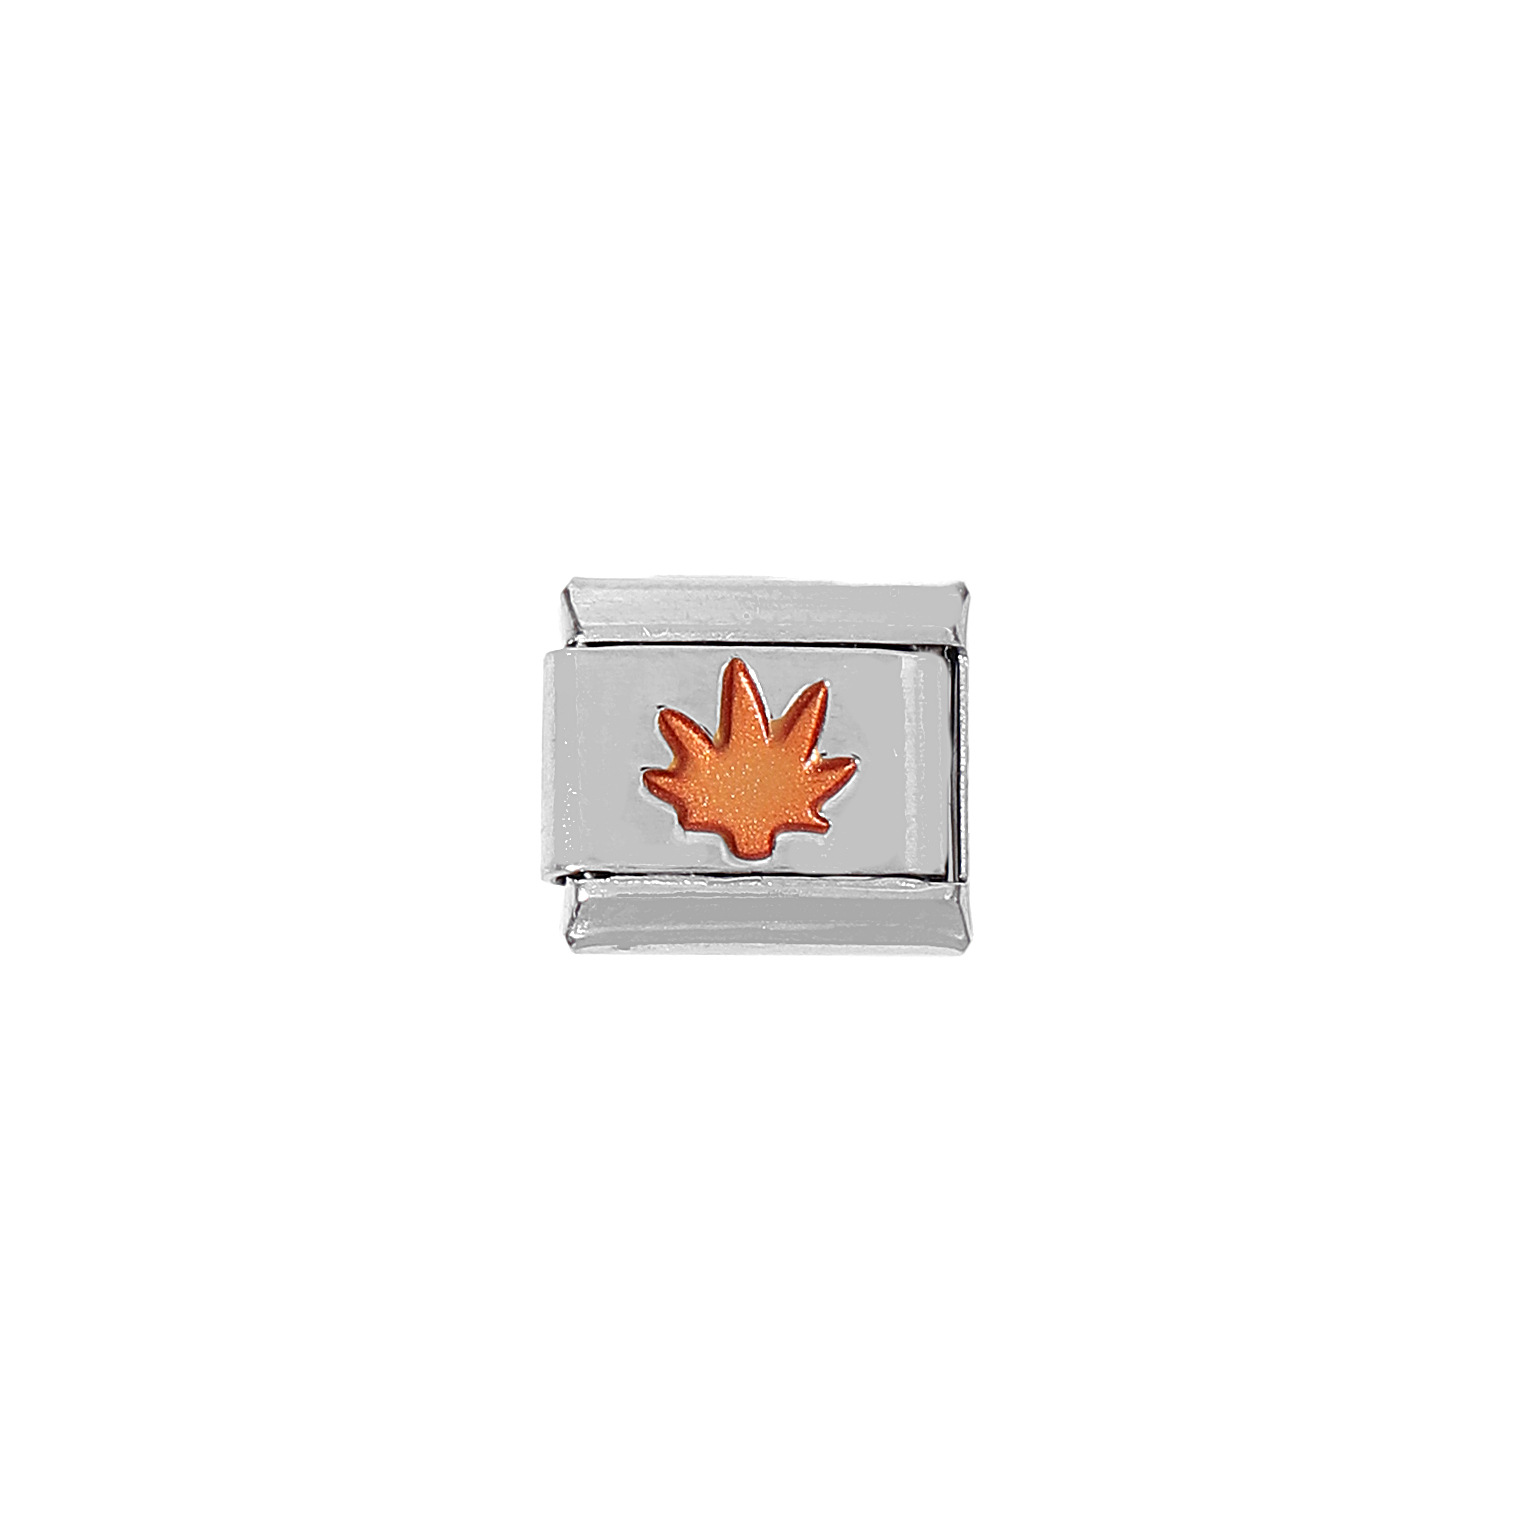 10:0277- Red Maple Leaf 1 section